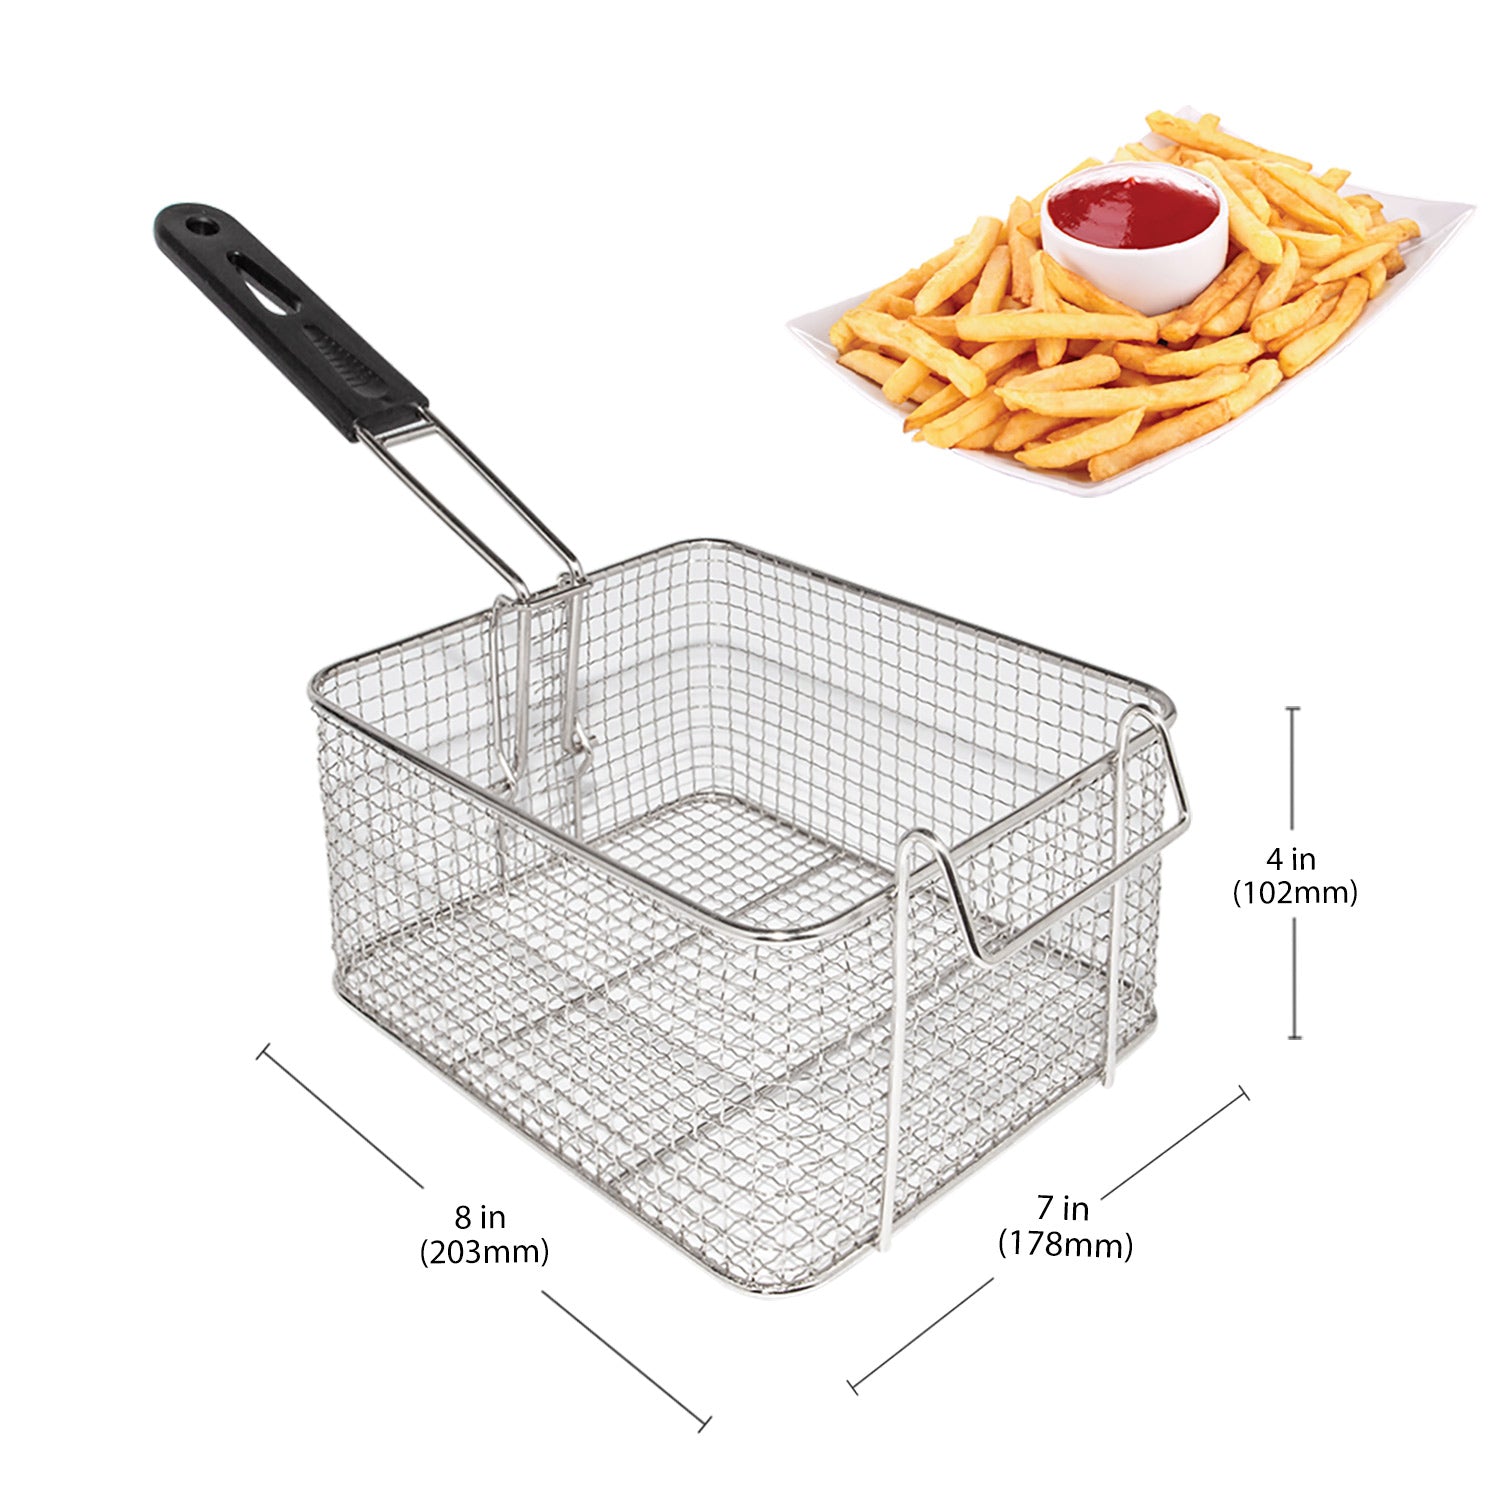 Professional stainless steel electric fryer with 6 liter capacity